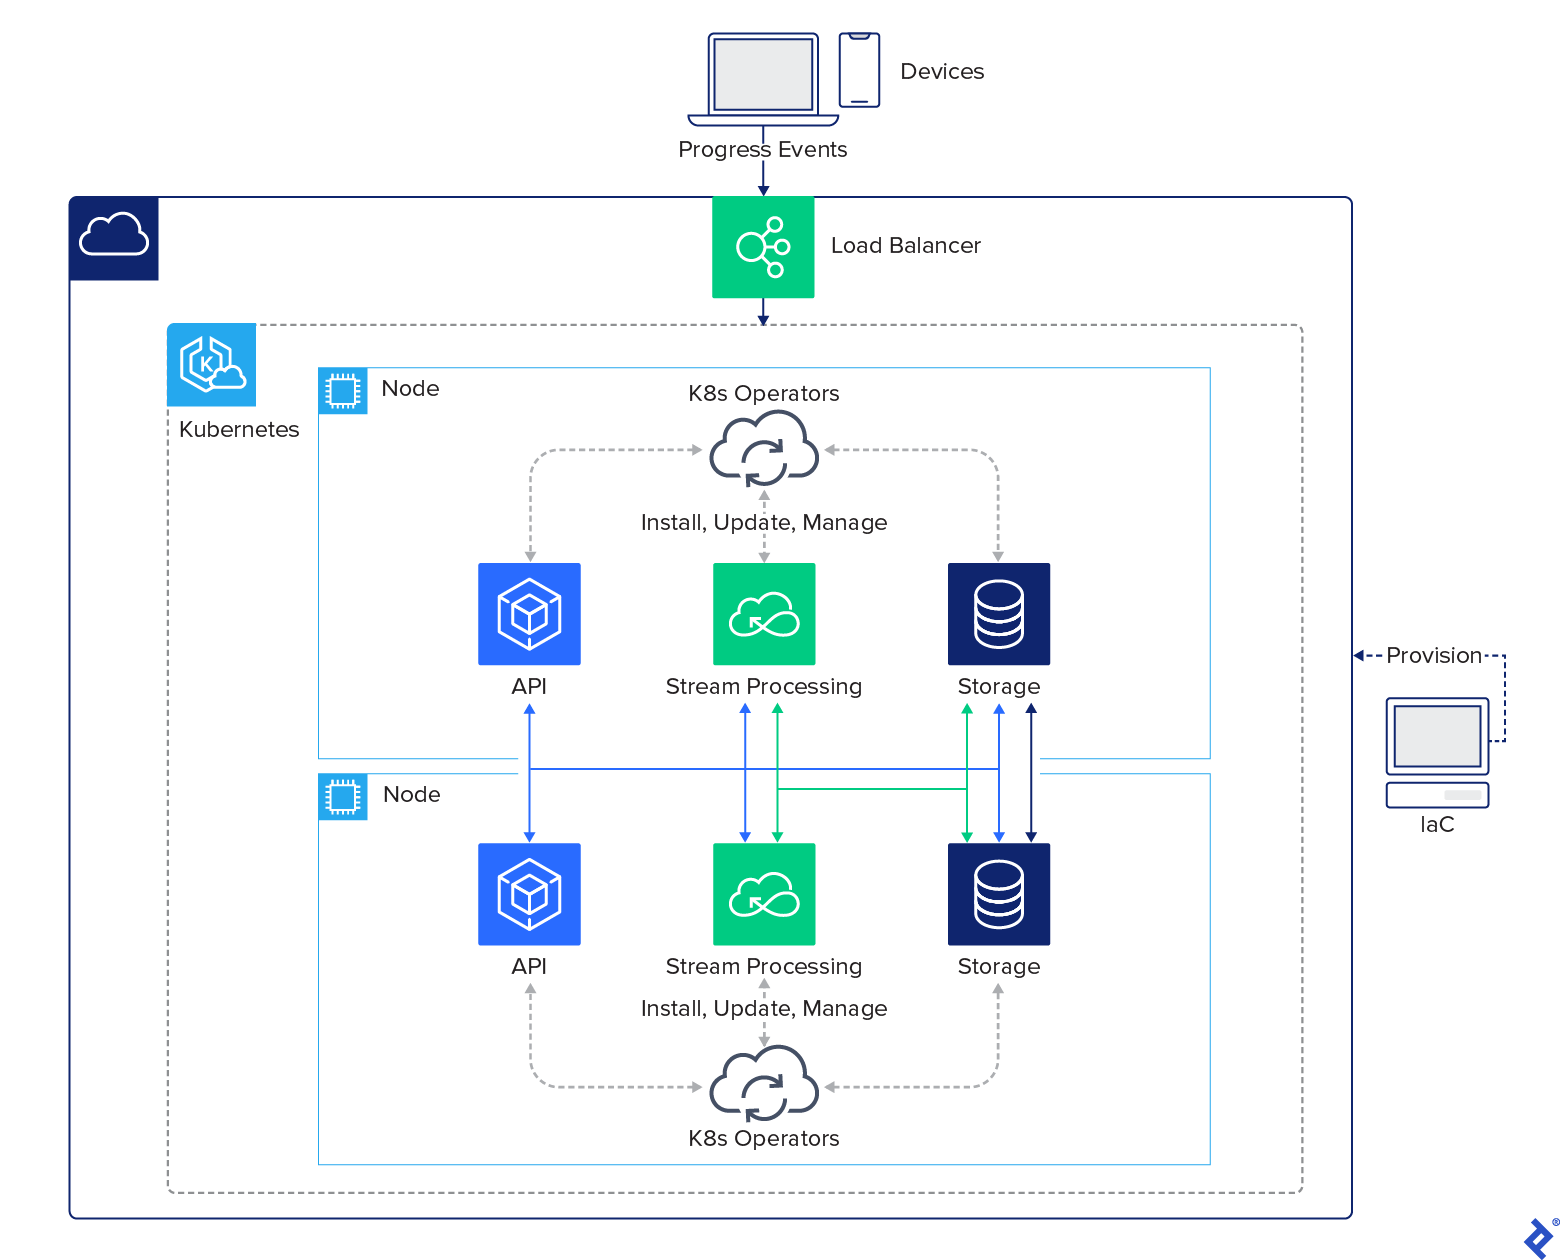 A diagram where, at the top, devices like a smartphone and laptop generate progress events. These events feed a cloud load balancer that distributes data into a cloud architecture where two identical Kubernetes nodes each contain three services: an API (denoted by a royal blue block), stream processing (denoted by a green block), and storage (denoted by a dark blue block). Royal blue two-way arrows connect the APIs to each other and to the remaining listed services (two stream processing and two storage blocks). Green two-way arrows connect the stream processing services to each other and to the two storage services. Dark blue two-way arrows connect the storage services to each other. The cloud load balancer directs traffic into Kubernetes (denoted by an arrow) where traffic will land in one of the two Kubernetes nodes. Outside the cloud on the right is an infrastructure-as-code tool, with an arrow labeled Provision pointing to the cloud box containing the two Kubernetes nodes. In each node, there are K8s operators that interact with the API, stream processing, and storage in that node to perform install, update, and manage tasks.